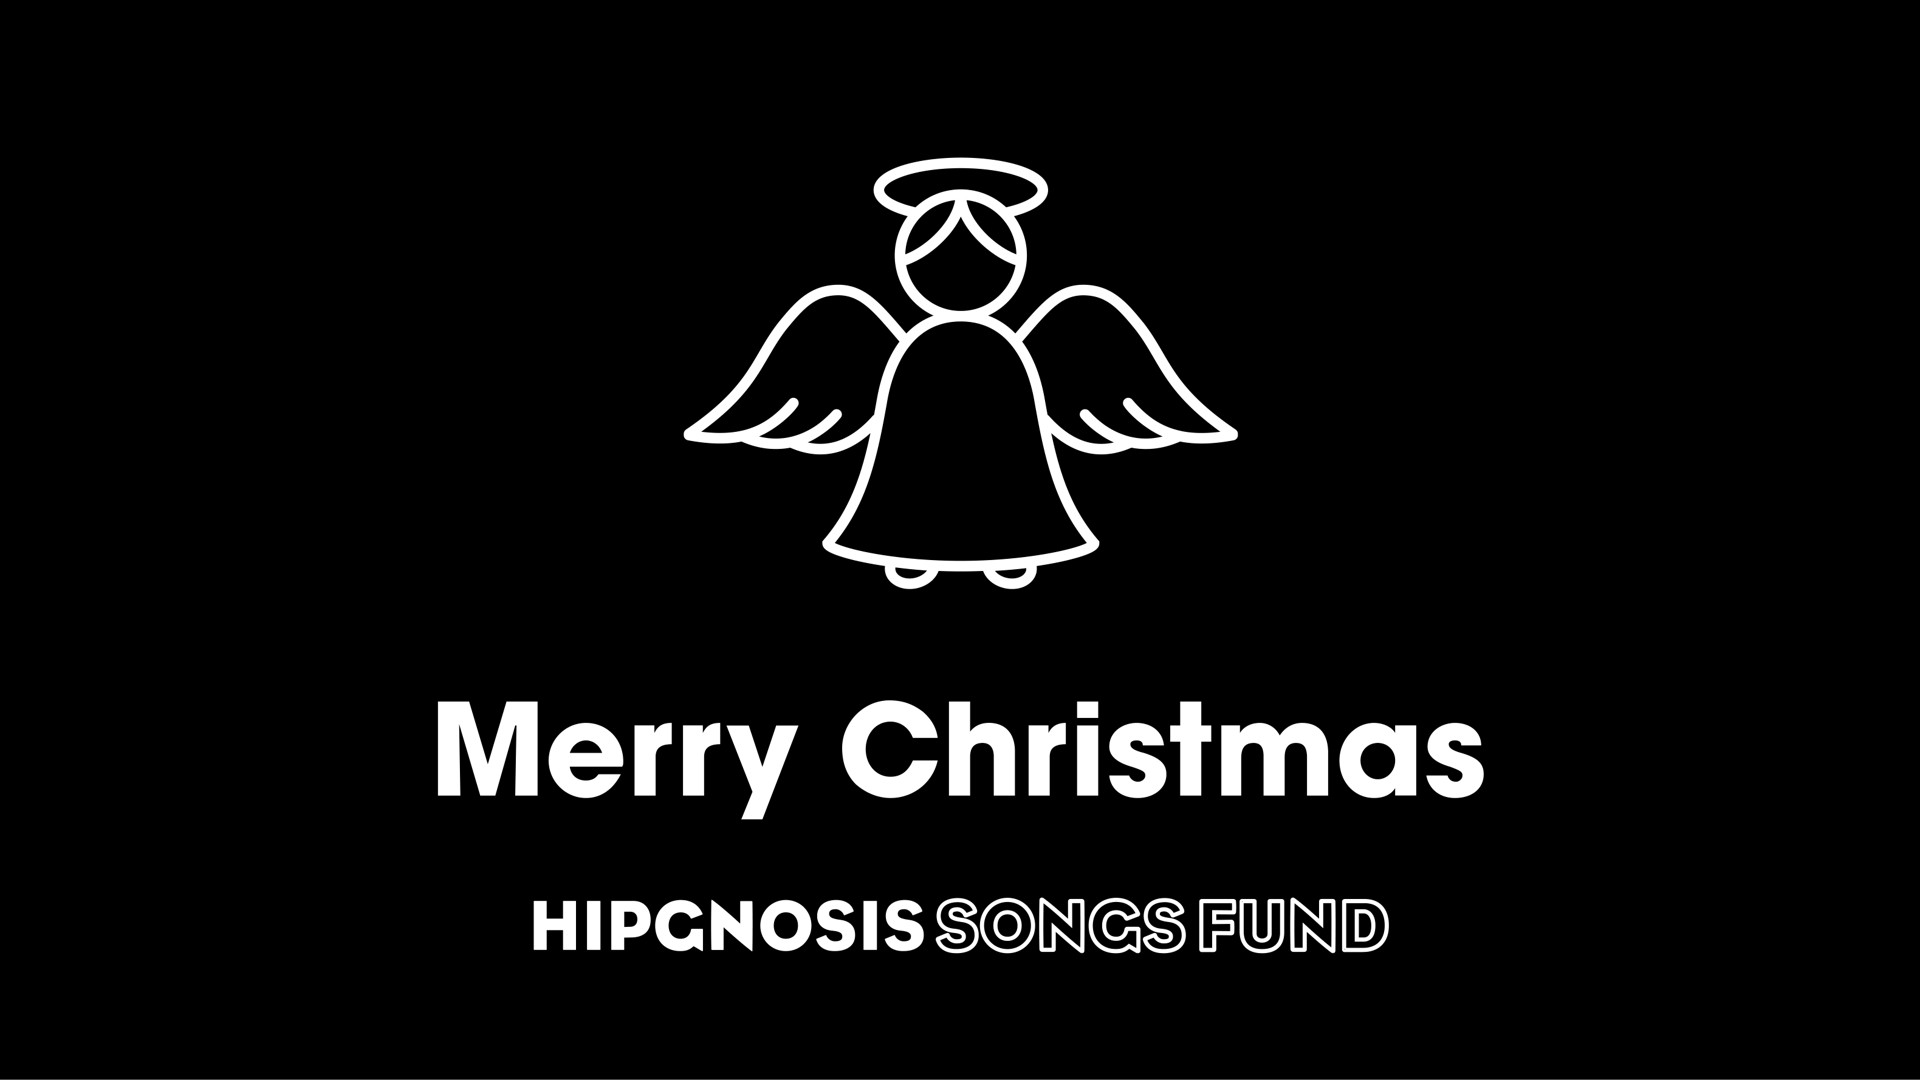 merry songs fund | Hipgnosis Songs Fund